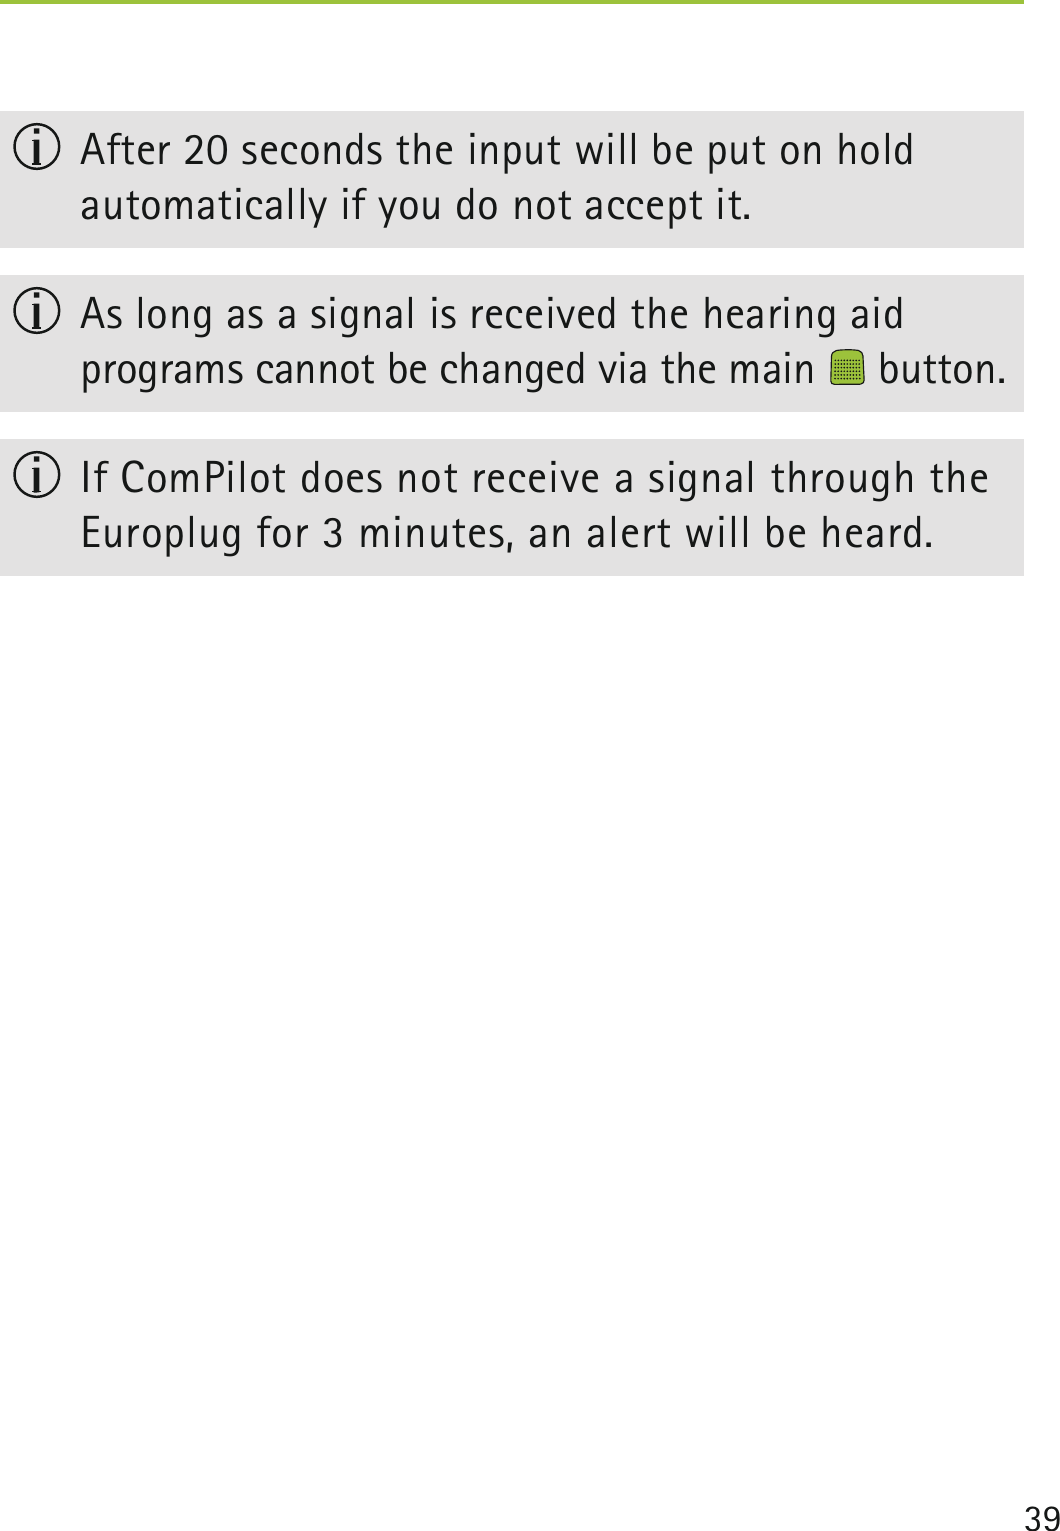 39   After 20 seconds the input will be put on hold  automatically if you do not accept it.  As long as a signal is received the hearing aid  programs cannot be changed via the main   button.  If ComPilot does not receive a signal through the Europlug for 3 minutes, an alert will be heard.